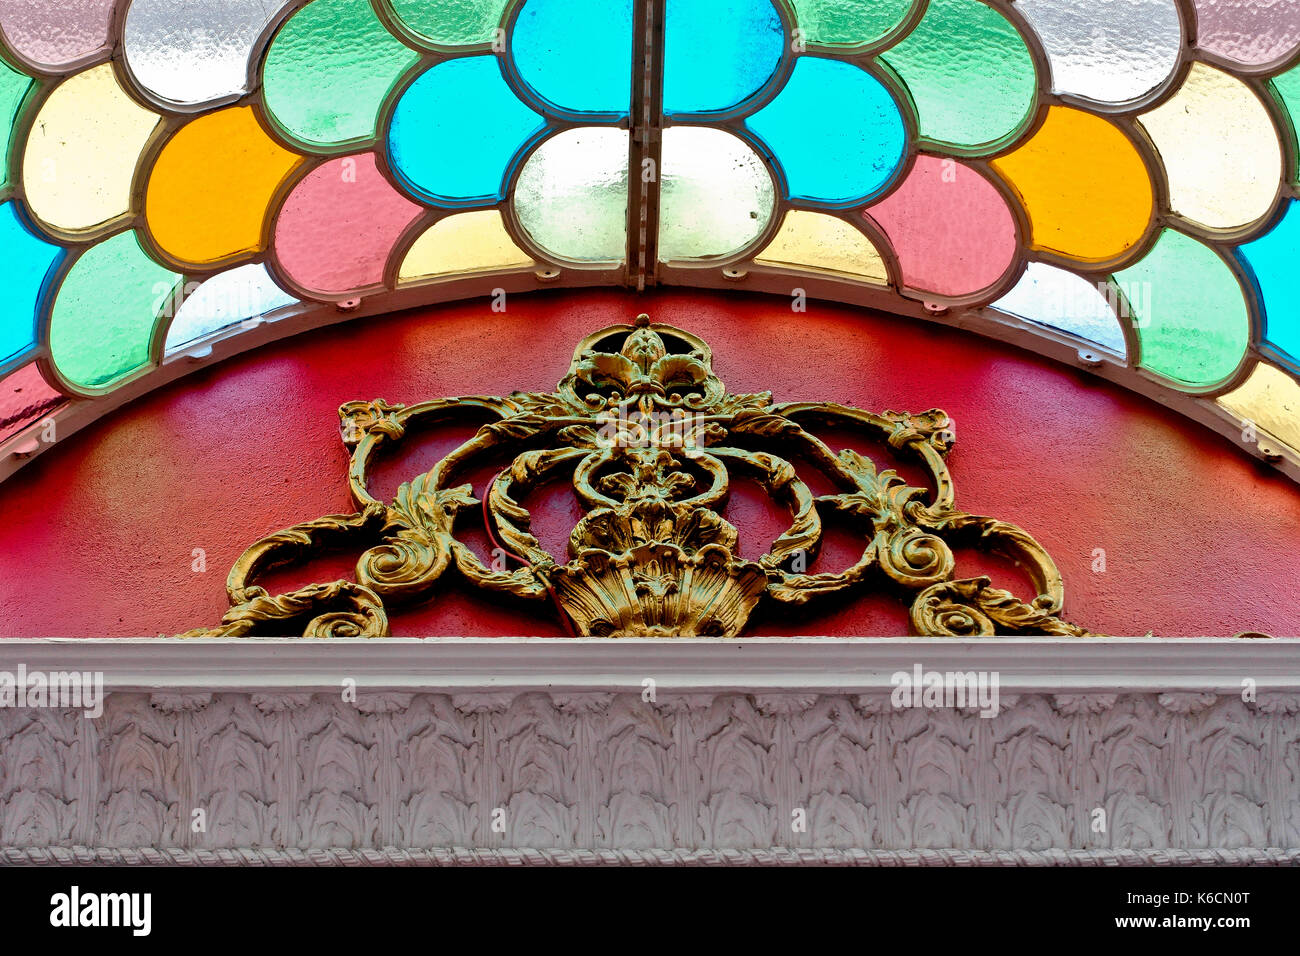 Entrance stained glass, wrought iron canopy to The Olympia Theatre Stalls Boxes. Dublin, Republic of Ireland, Europe, European Union, EU. Stock Photo